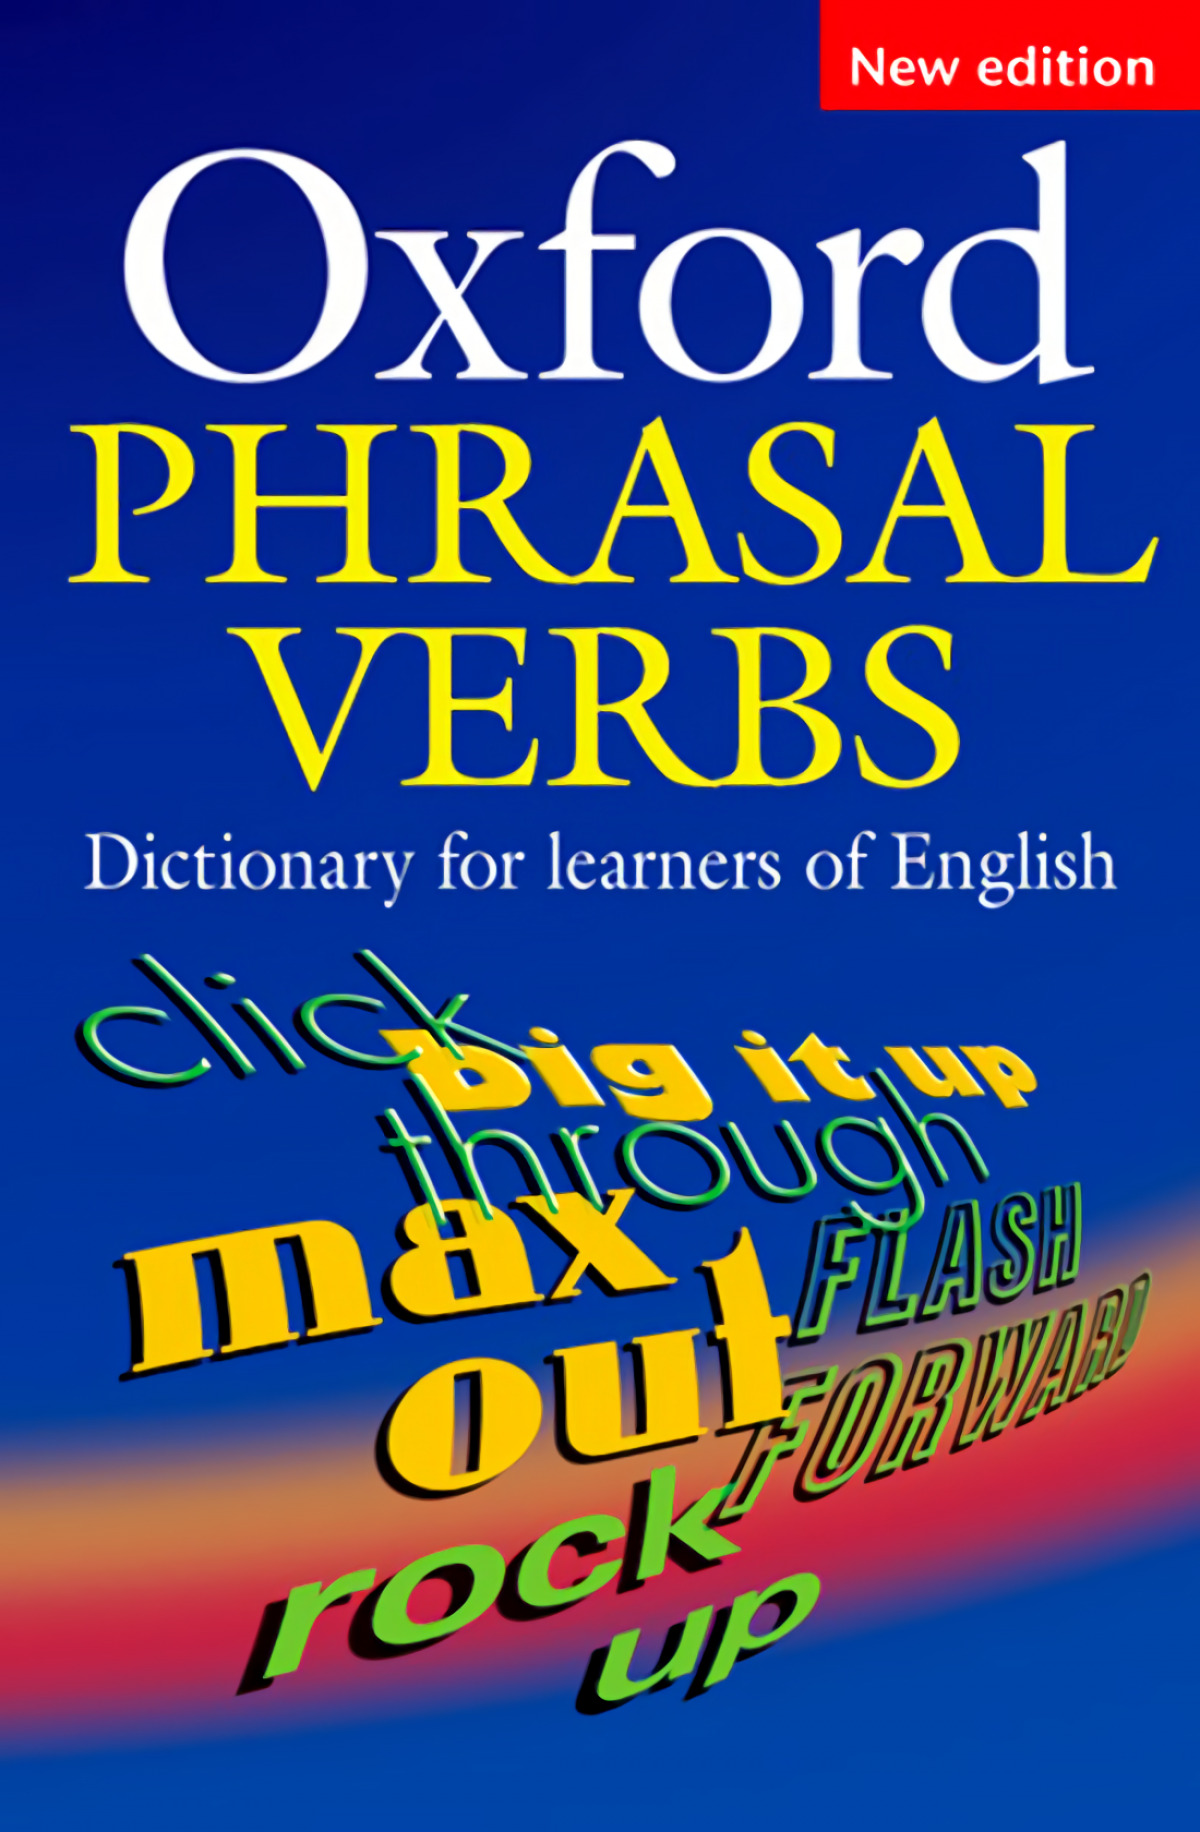 Oxford Dictionary of Phrasal Verbs for Learners of English 2 - Vv.Aa.